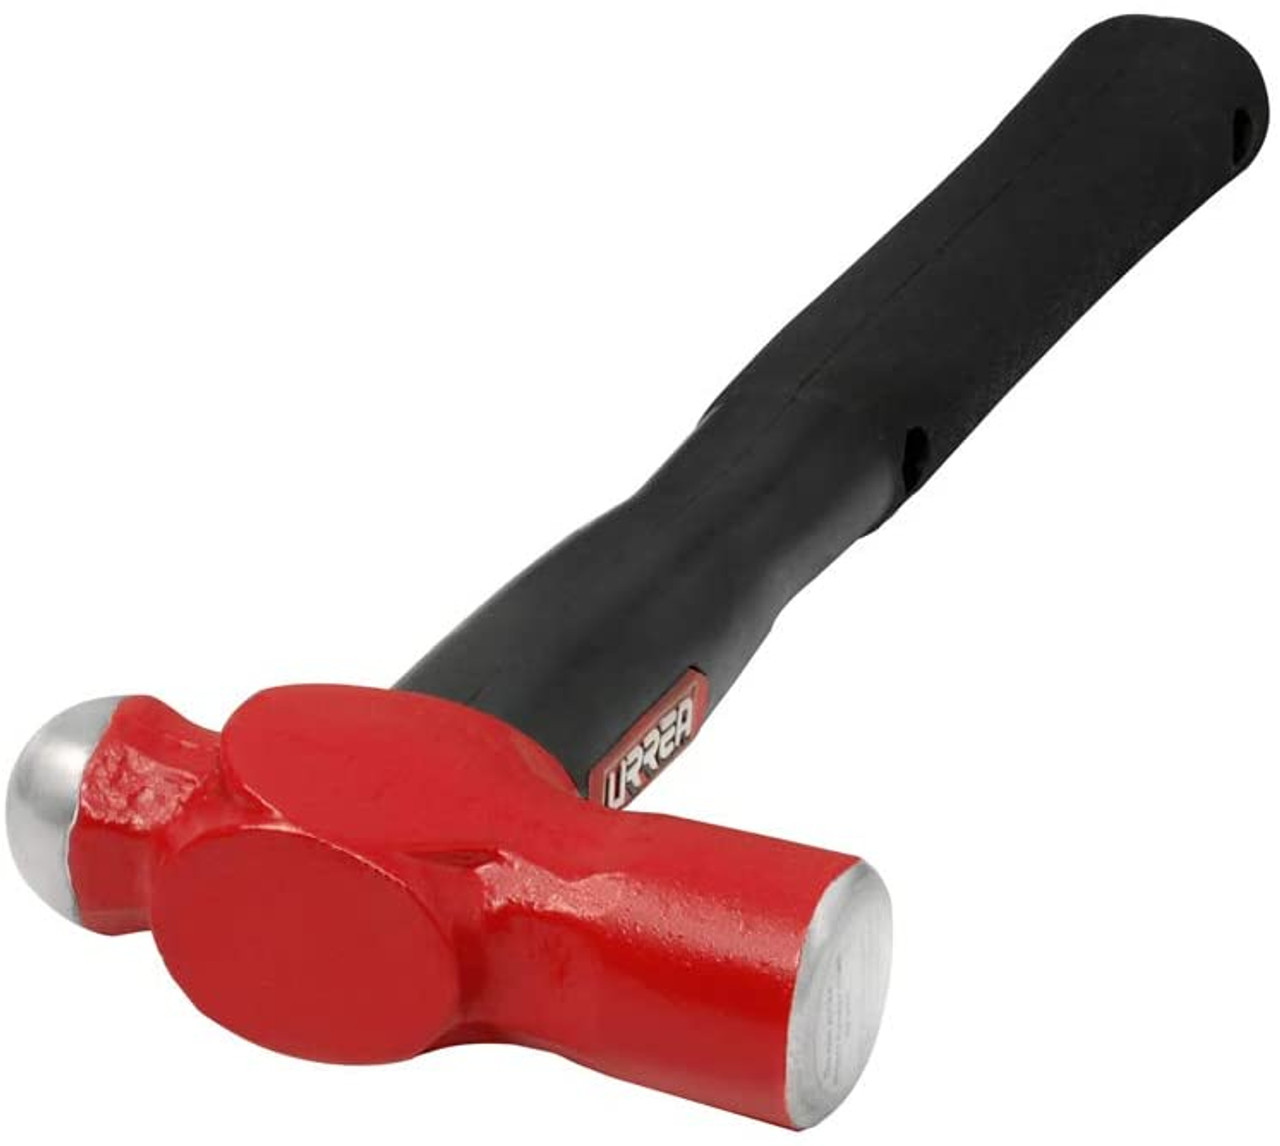 Steelrods Ball Pein Hammers With 14" Rubber Grip Handle